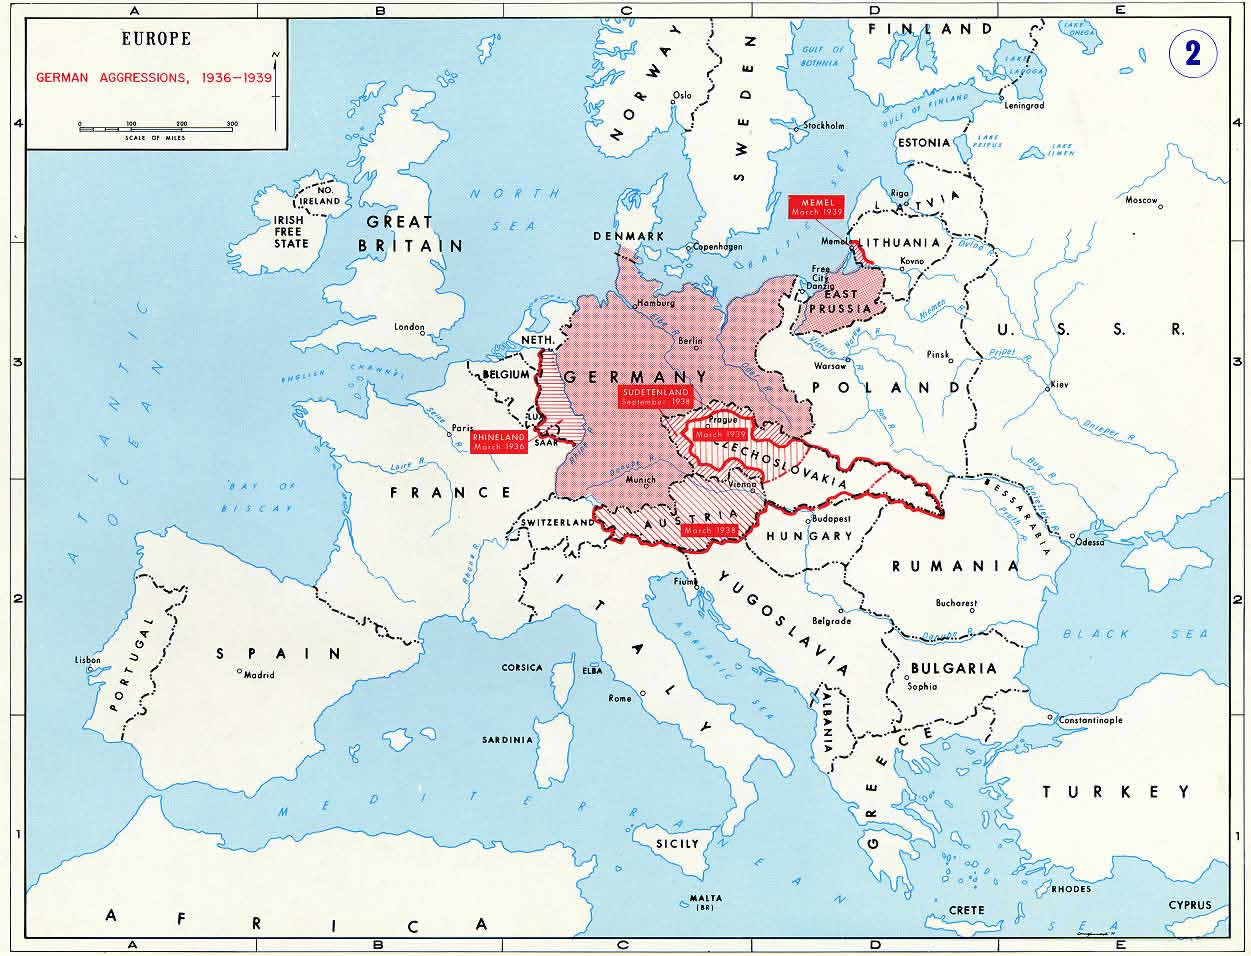 German expansion in the 1930s